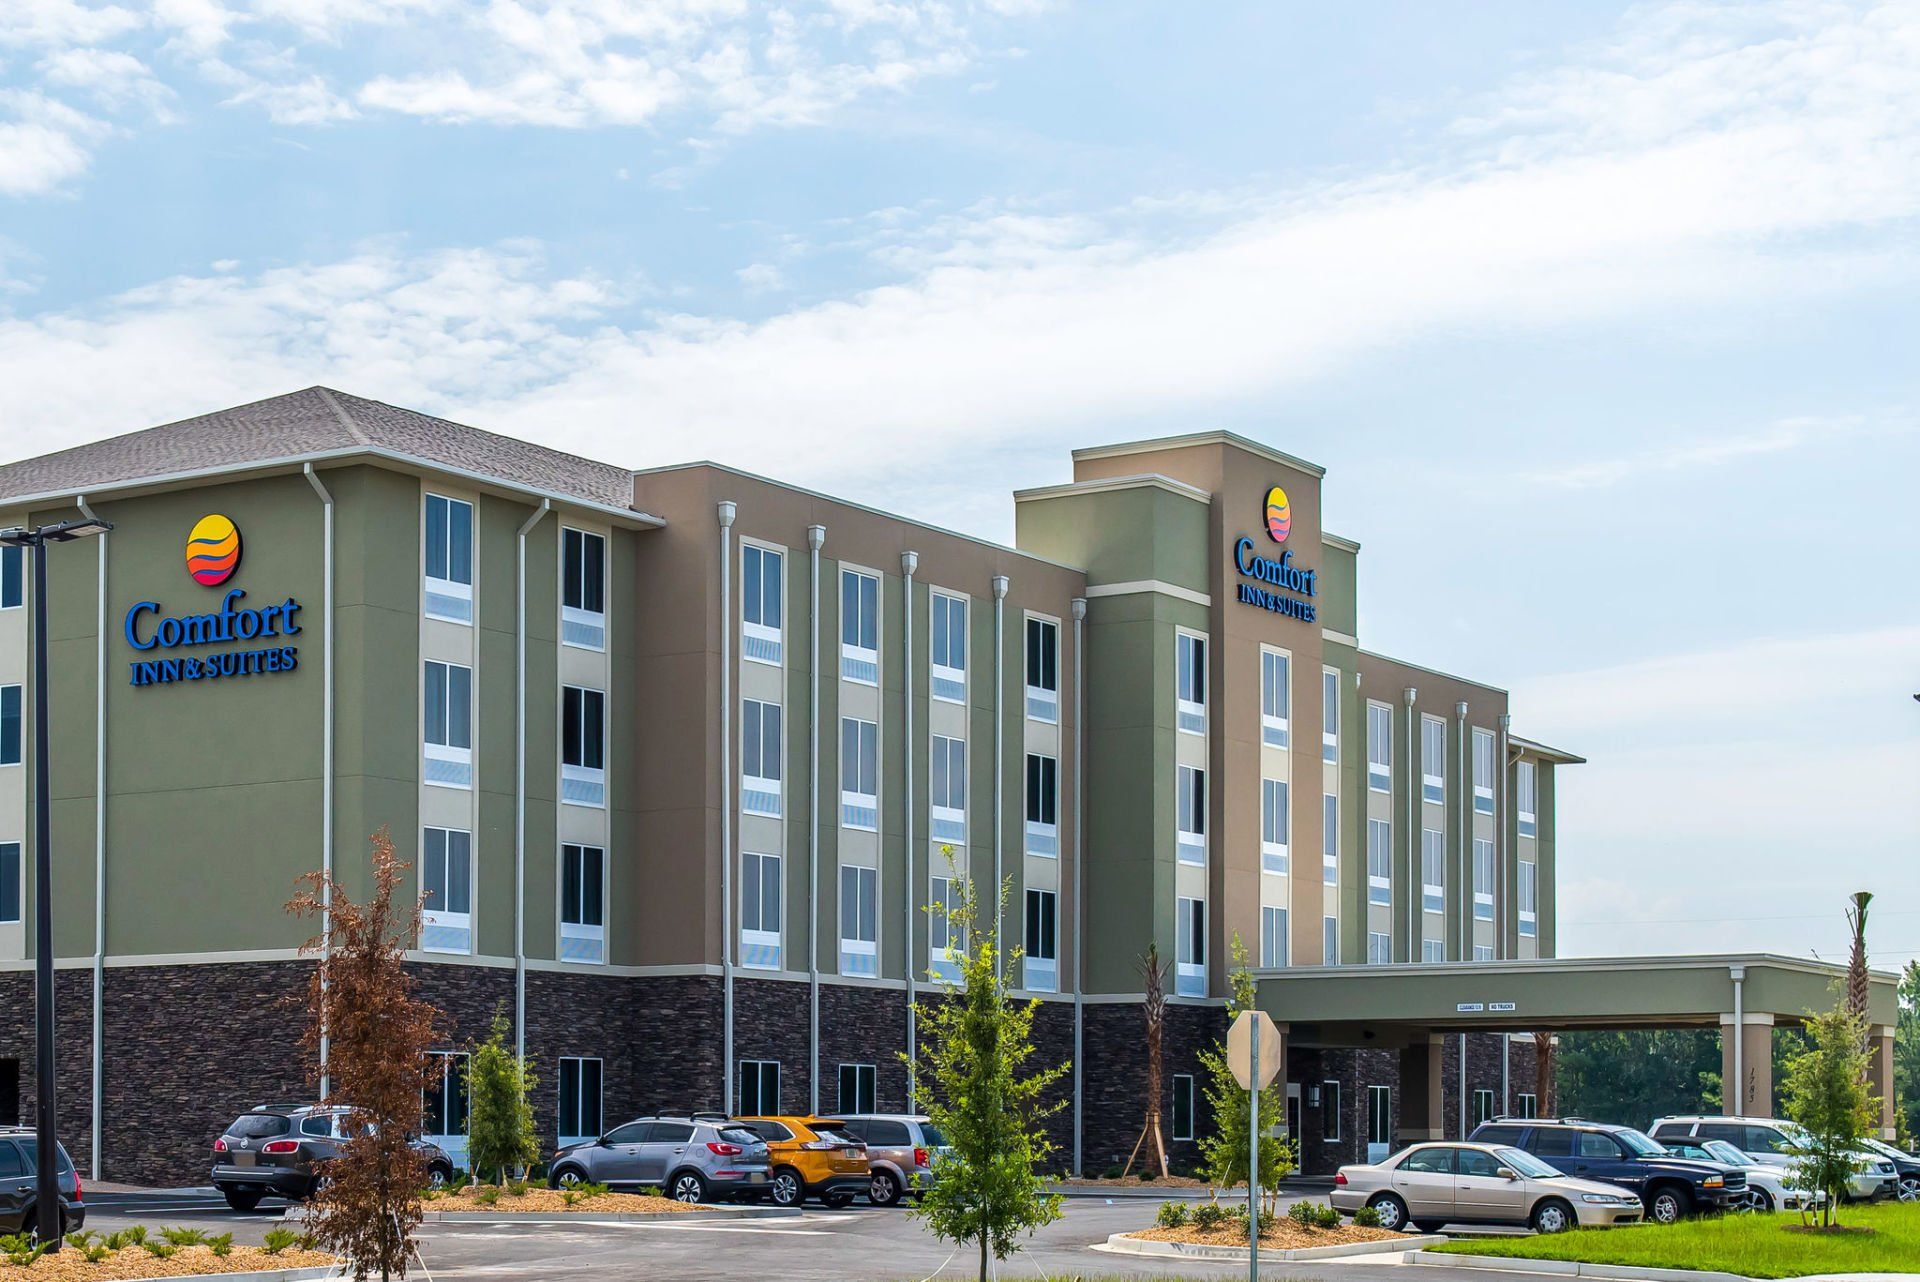 Green exterior of the Comfort Inn and Suites in Valdosta, GA owned by Williams Hotel Group.